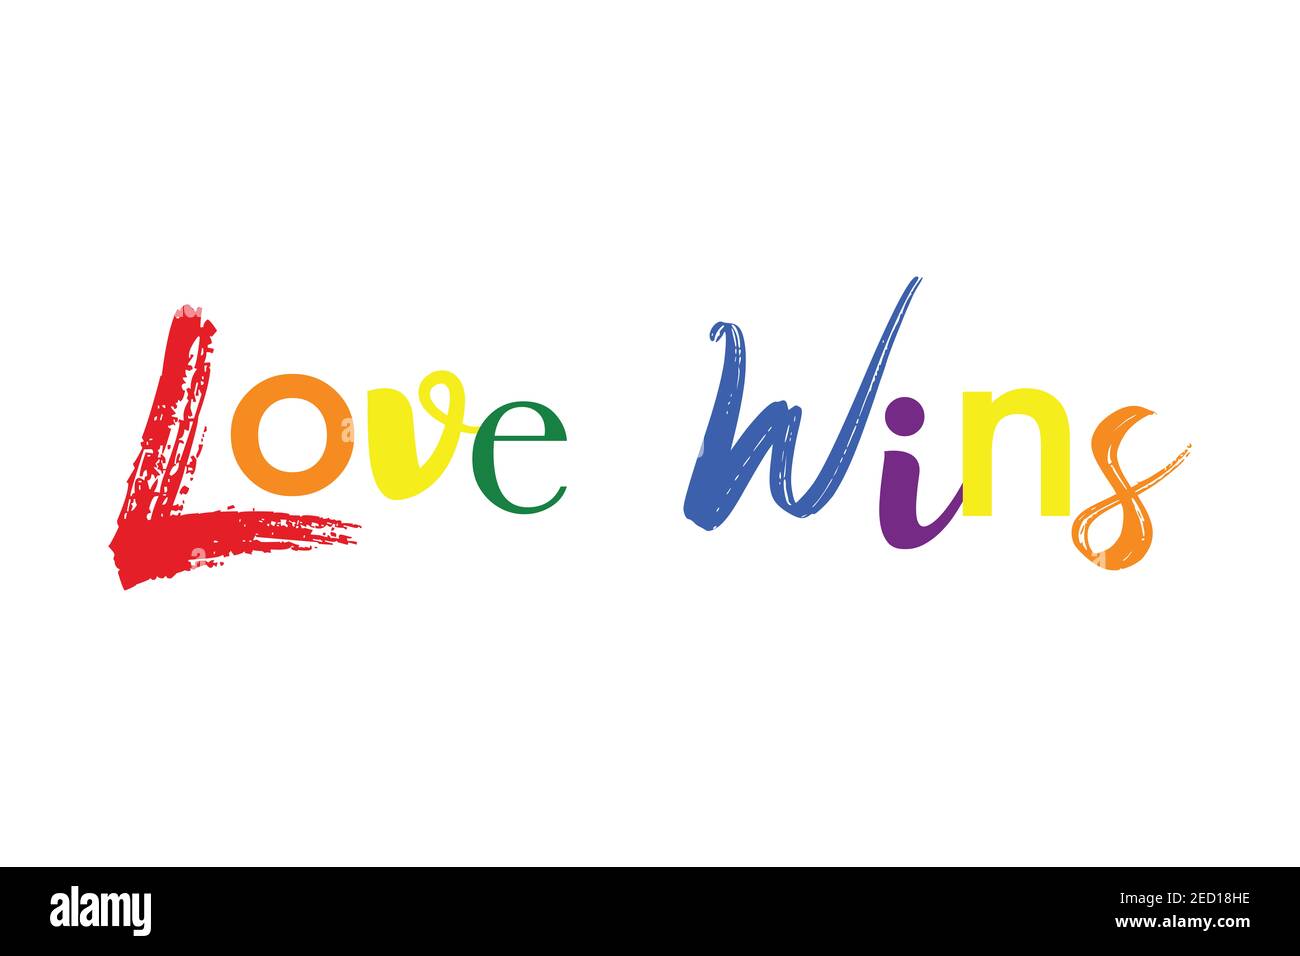 Modern, playful, colorful graphic design of a saying 'Love wins' in LGBT colors. Creative, experimental, cheerful typography. Stock Photo